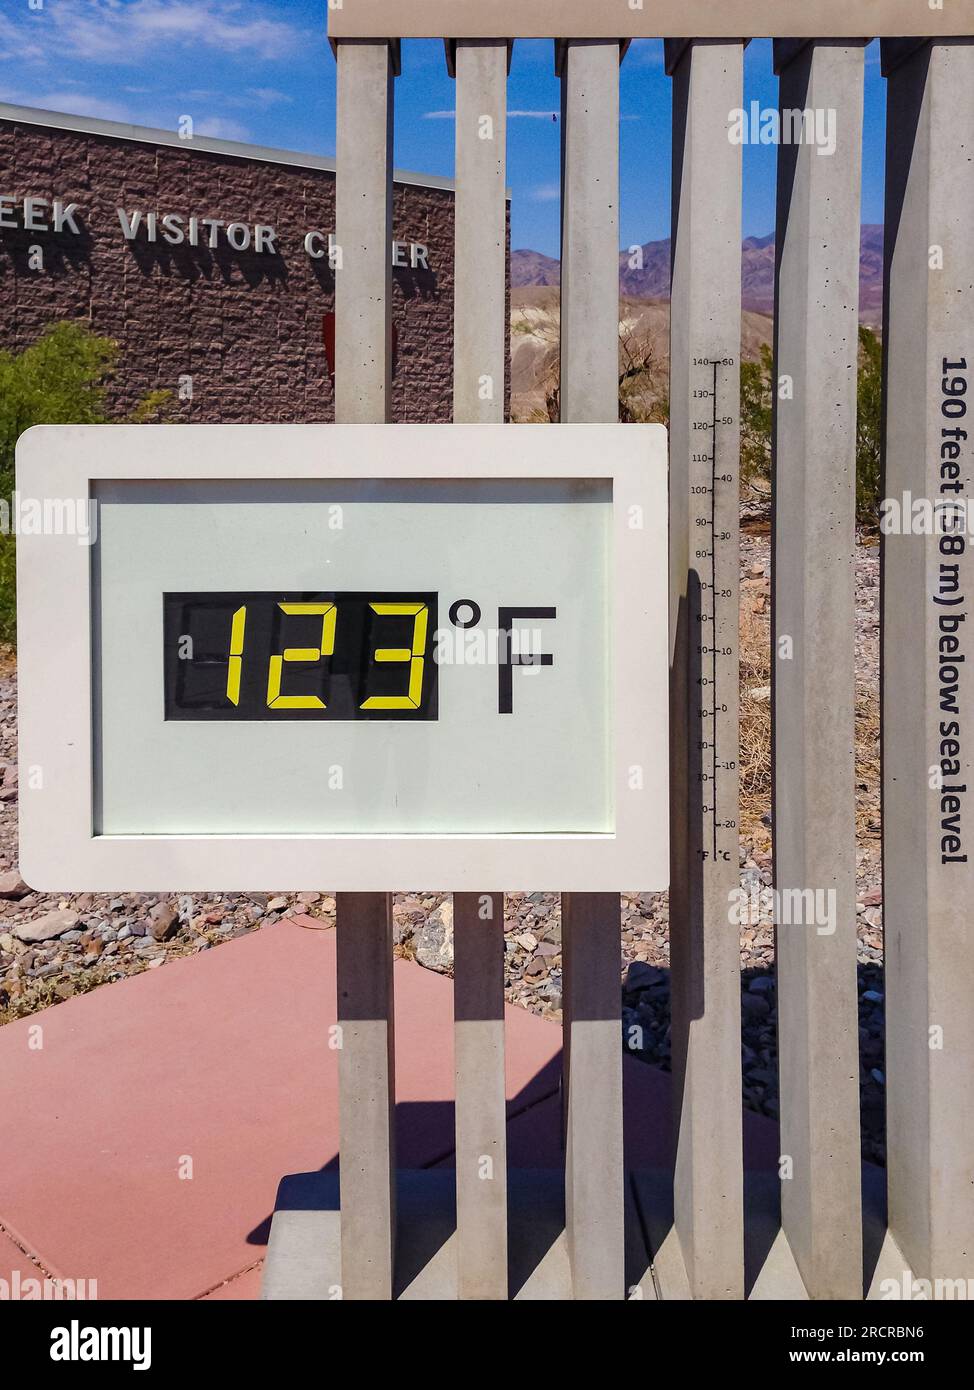 Upright image of the popular thermometer at Furnace Creek in Death Valley National Park showing extreme climate crisis temperatures, California, USA Stock Photo